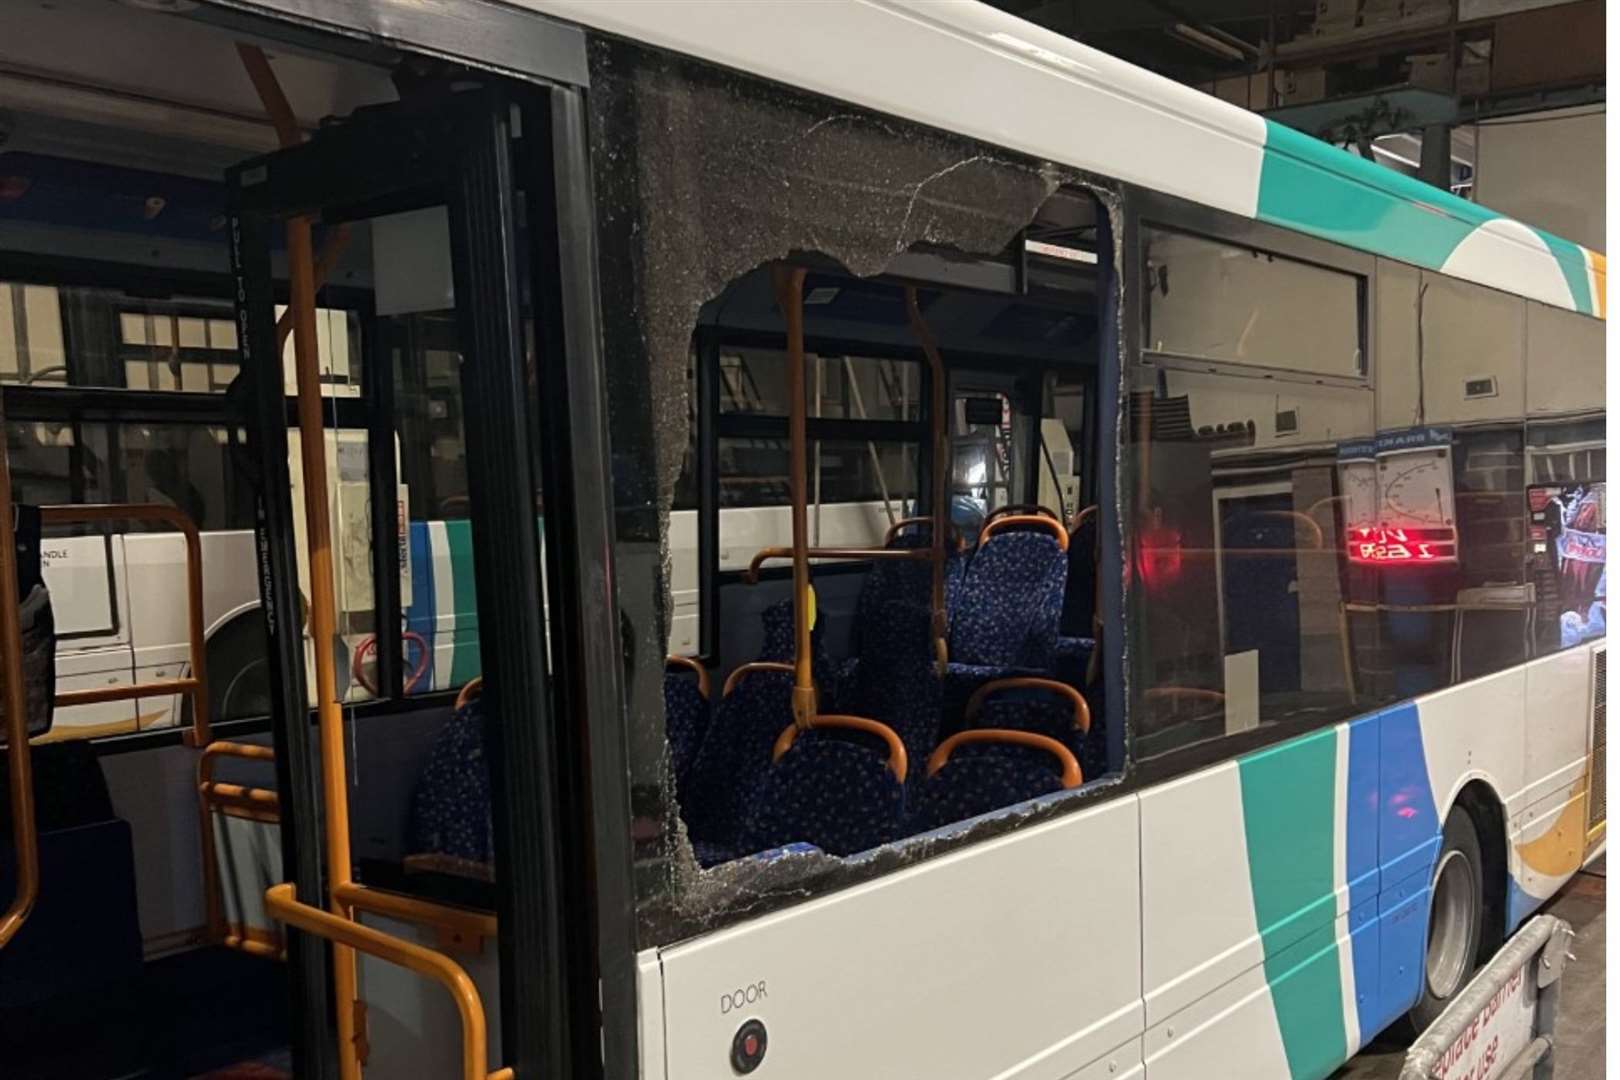 The damage done to one Stagecoach bus in the Trinity Road area of Ashford. Photo: Stagecoach